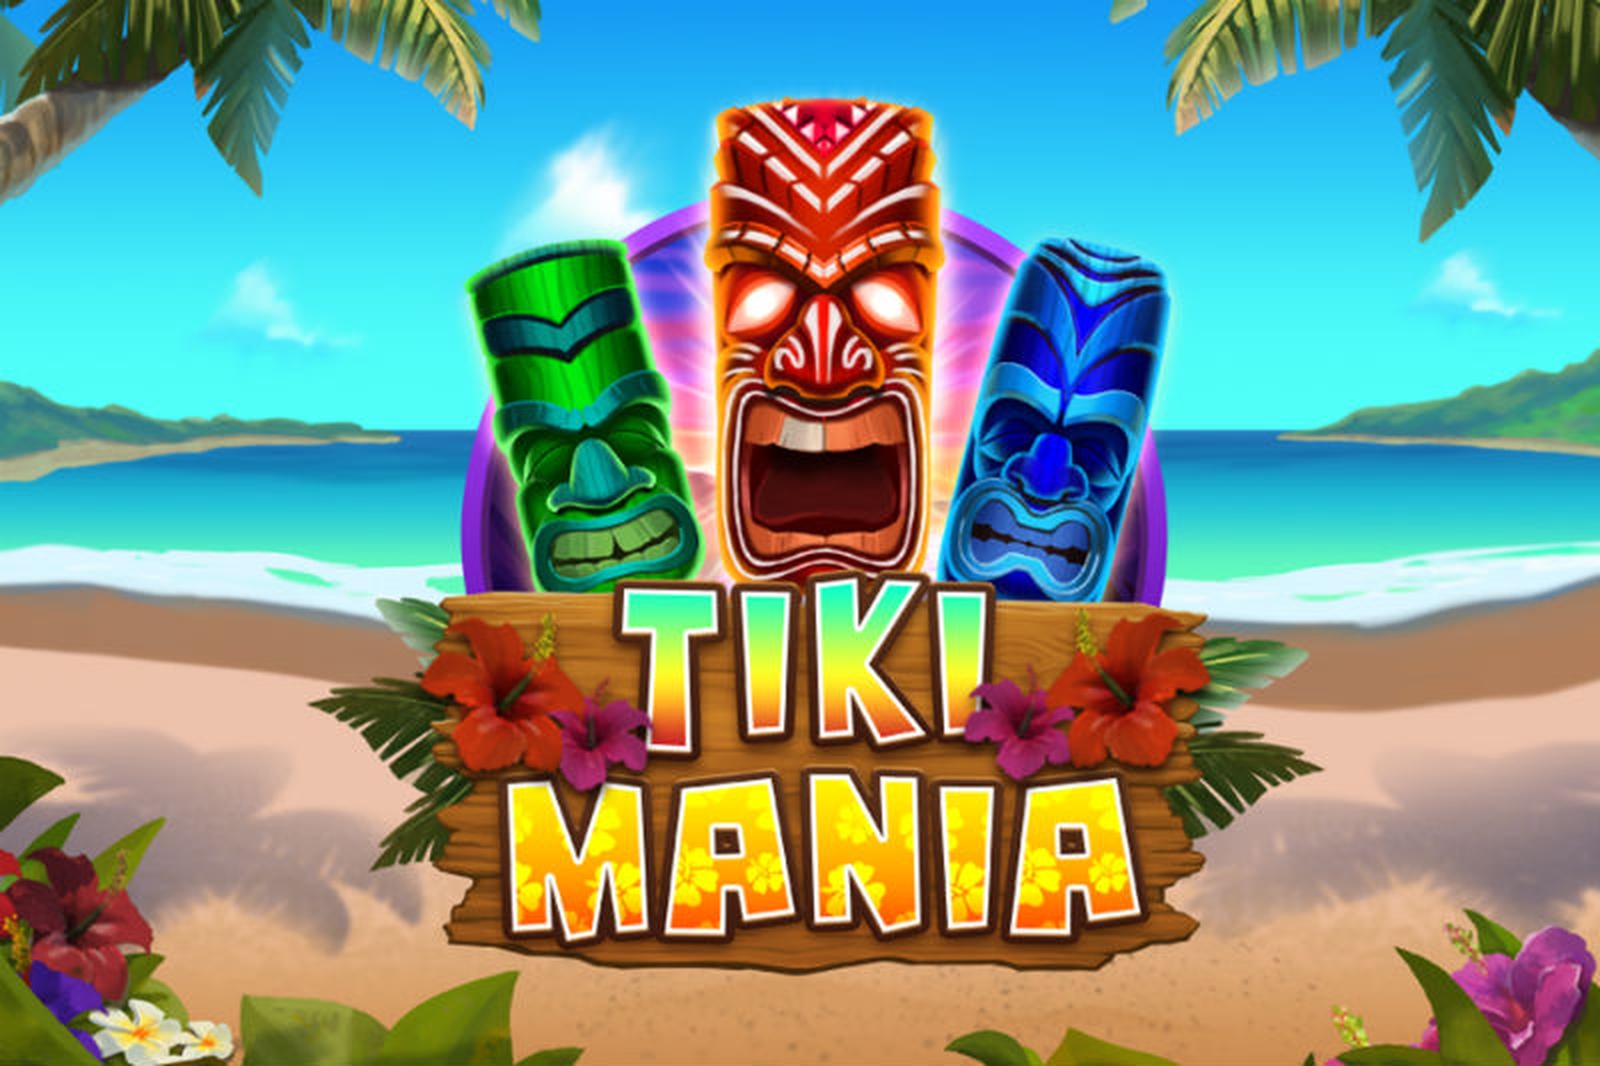 The Tiki Mania Online Slot Demo Game by Fortune Factory Studios